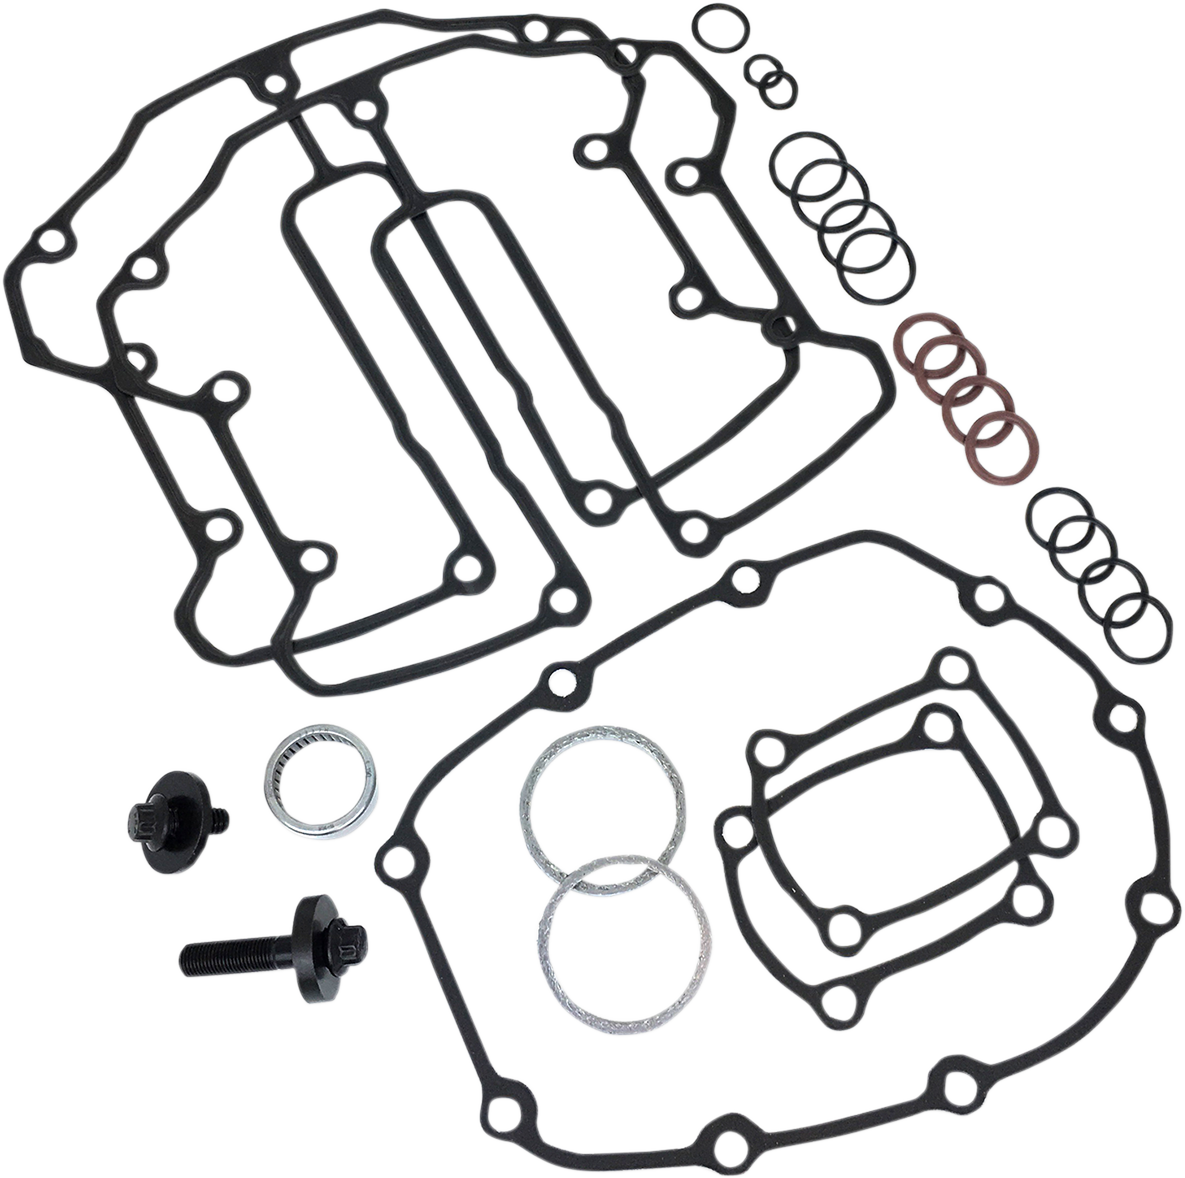 Feuling Top End Camshaft Installation Kit 2017-2021 Harley M8 Softail Touring